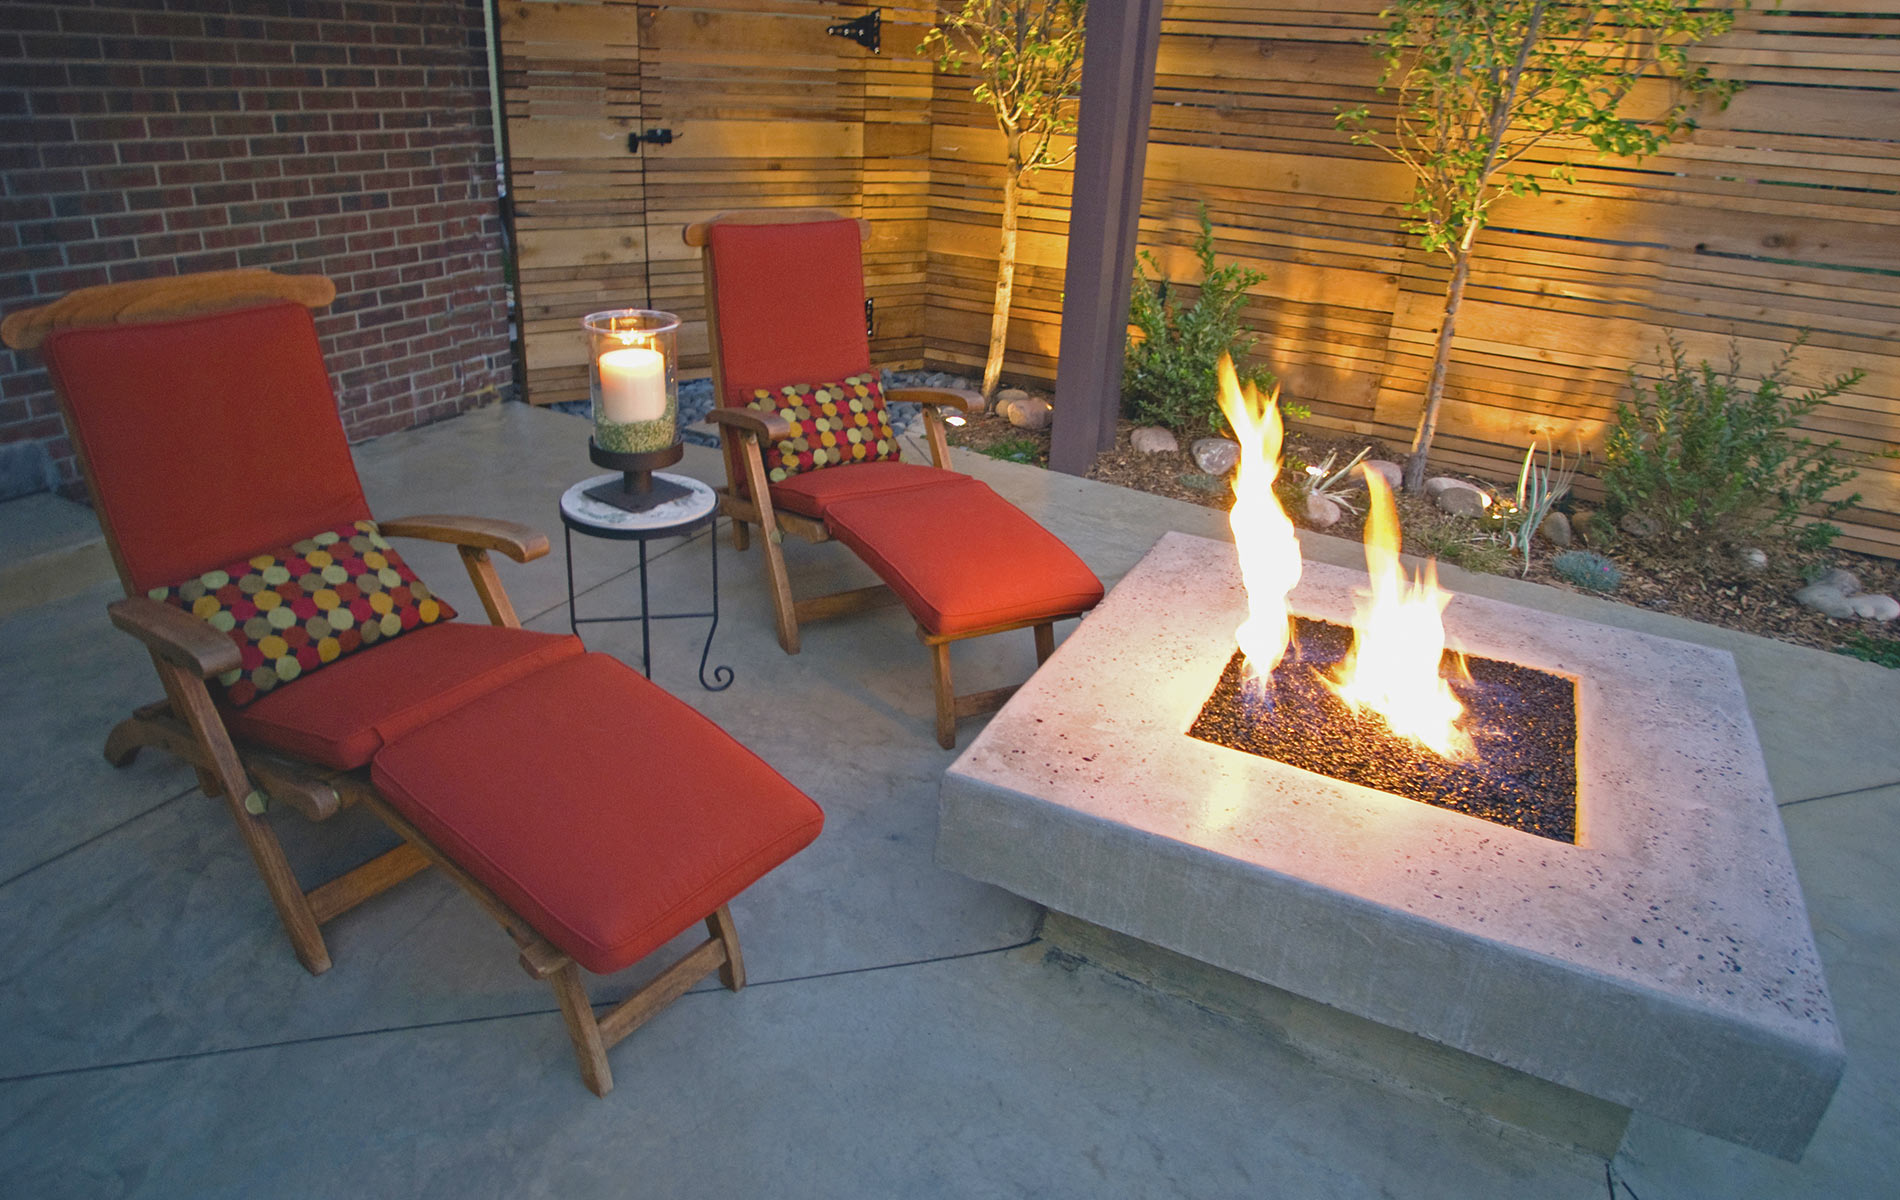 Glass topped firepit and pavers in Award Winning Outdoor Room Mile High Landscaping in Denver